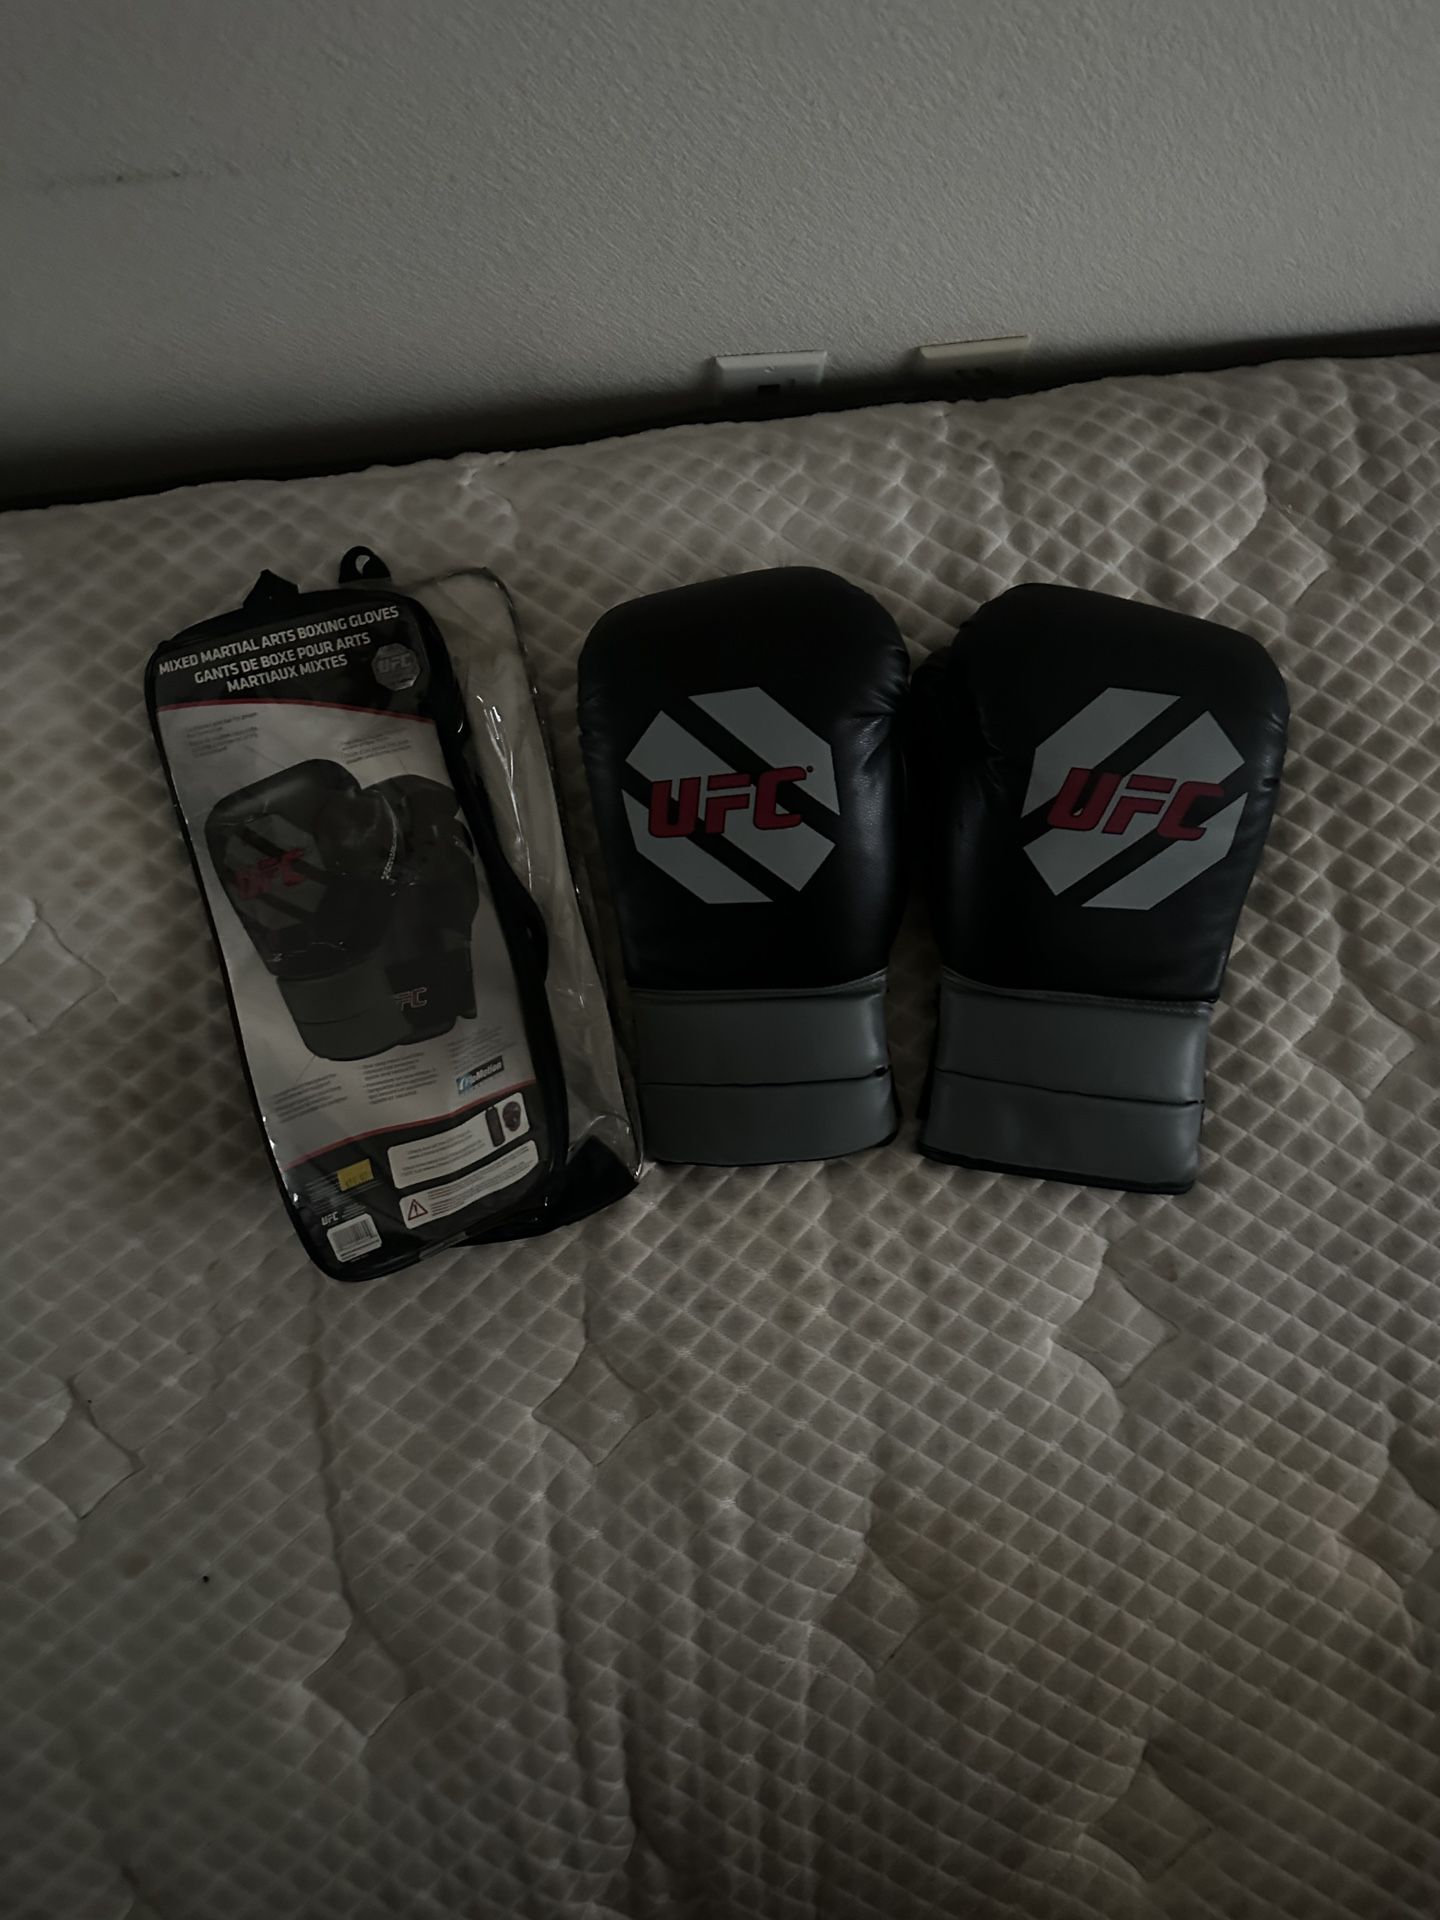 UFC 16oz. Boxing Gloves With Carrying Case